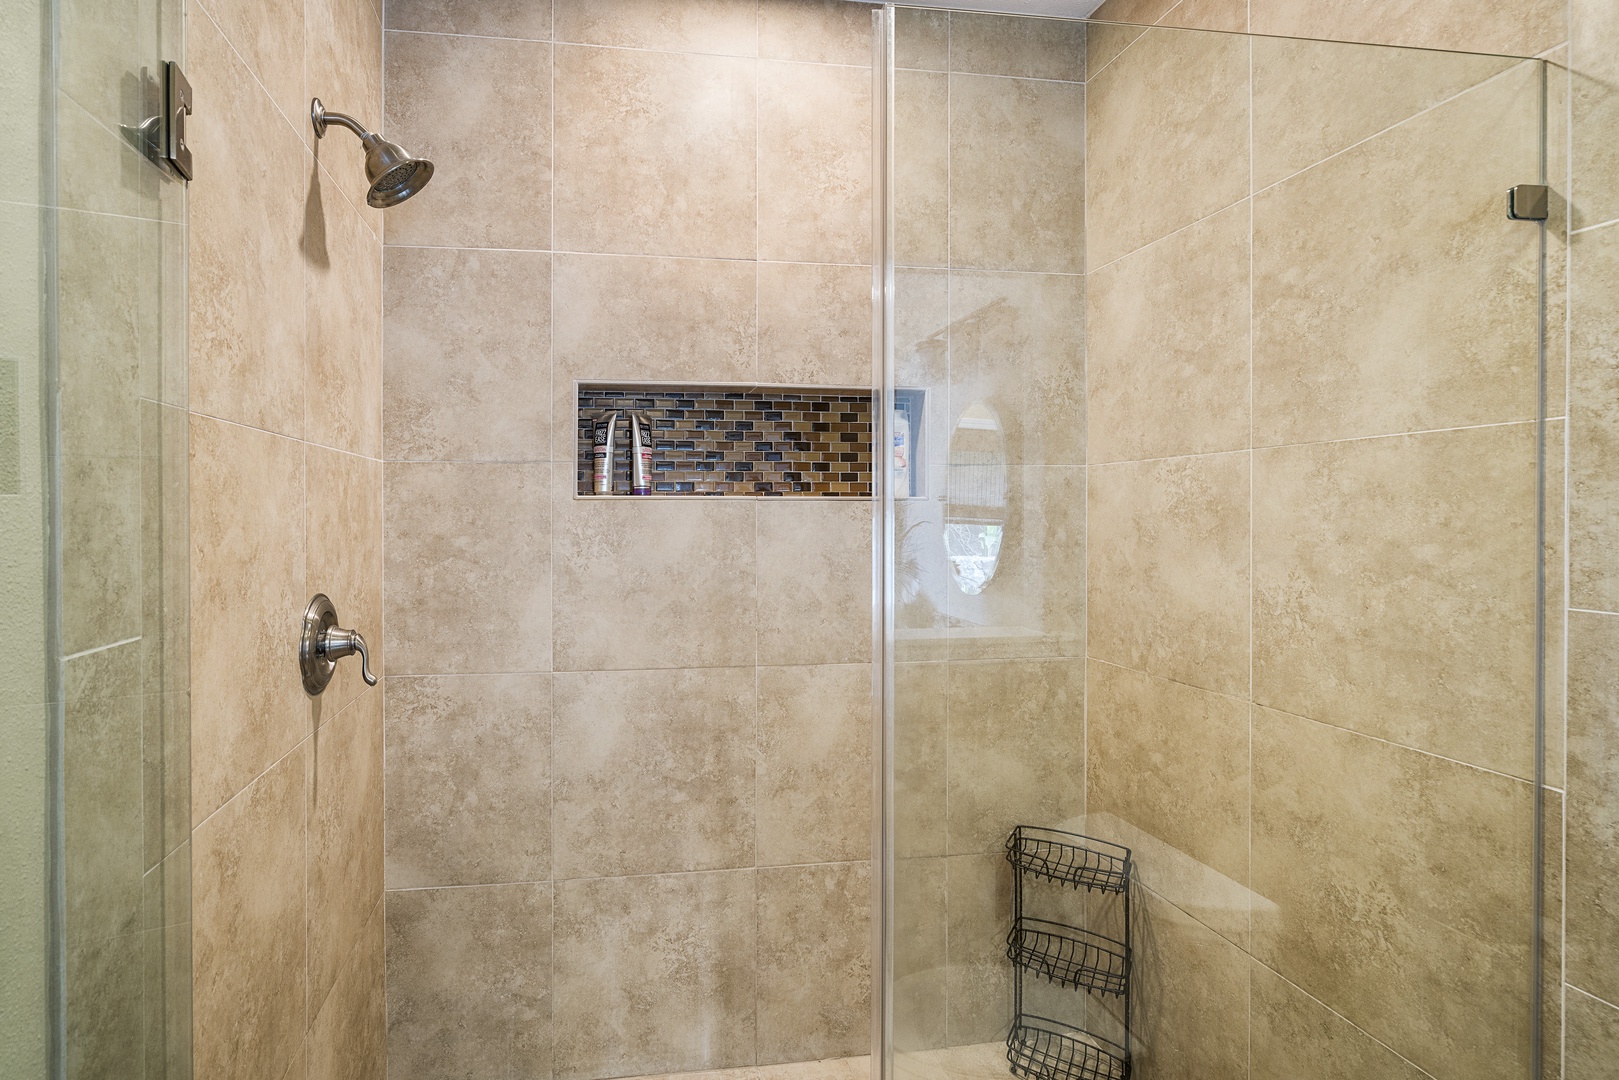 Kailua Kona Vacation Rentals, Sunset Hale - Walk-in shower in the Primary bathroom